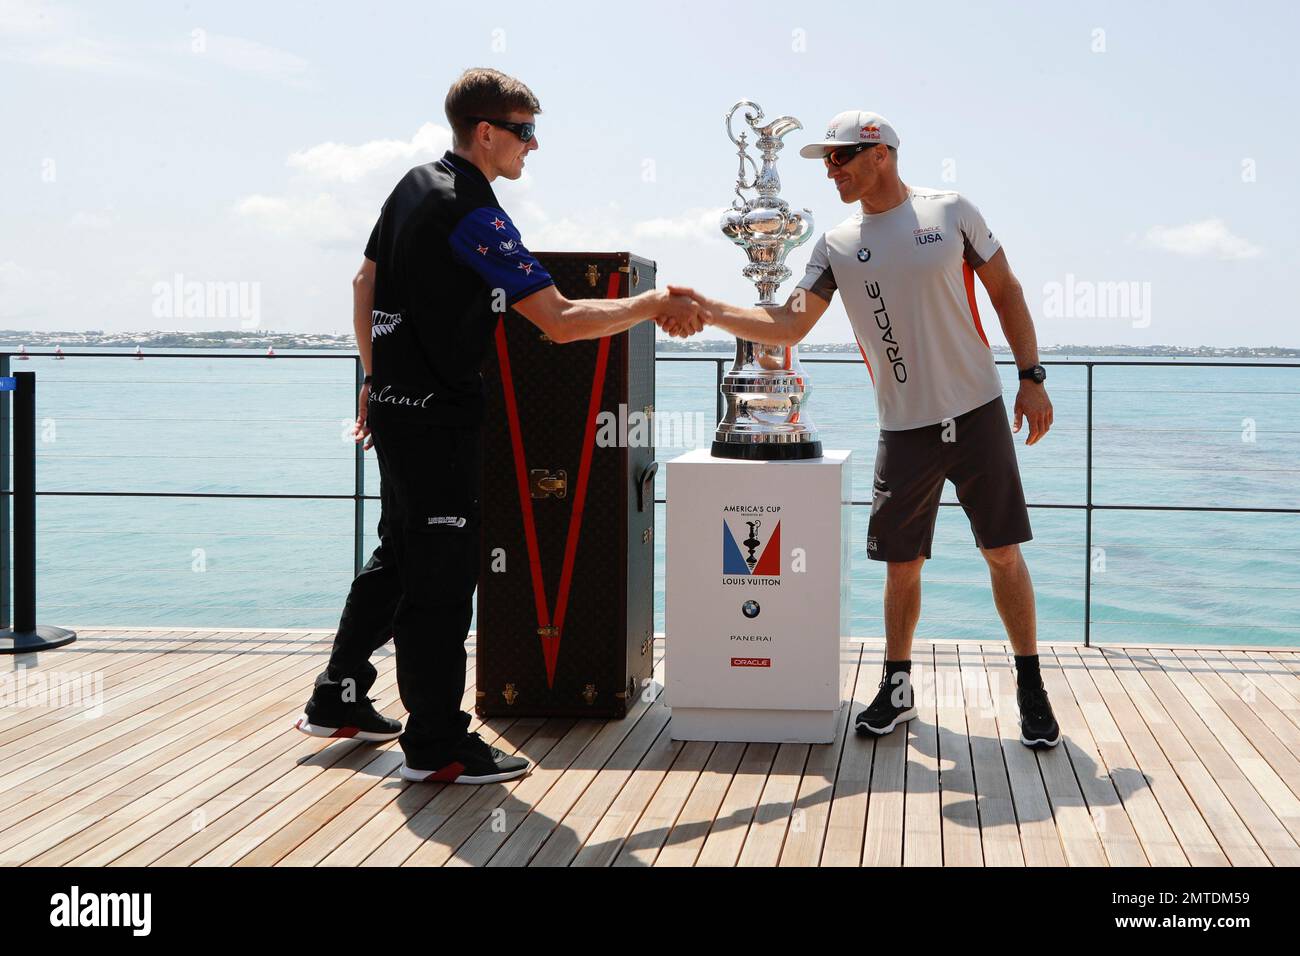 THE LOUIS VUITTON CUP BEGINS - News